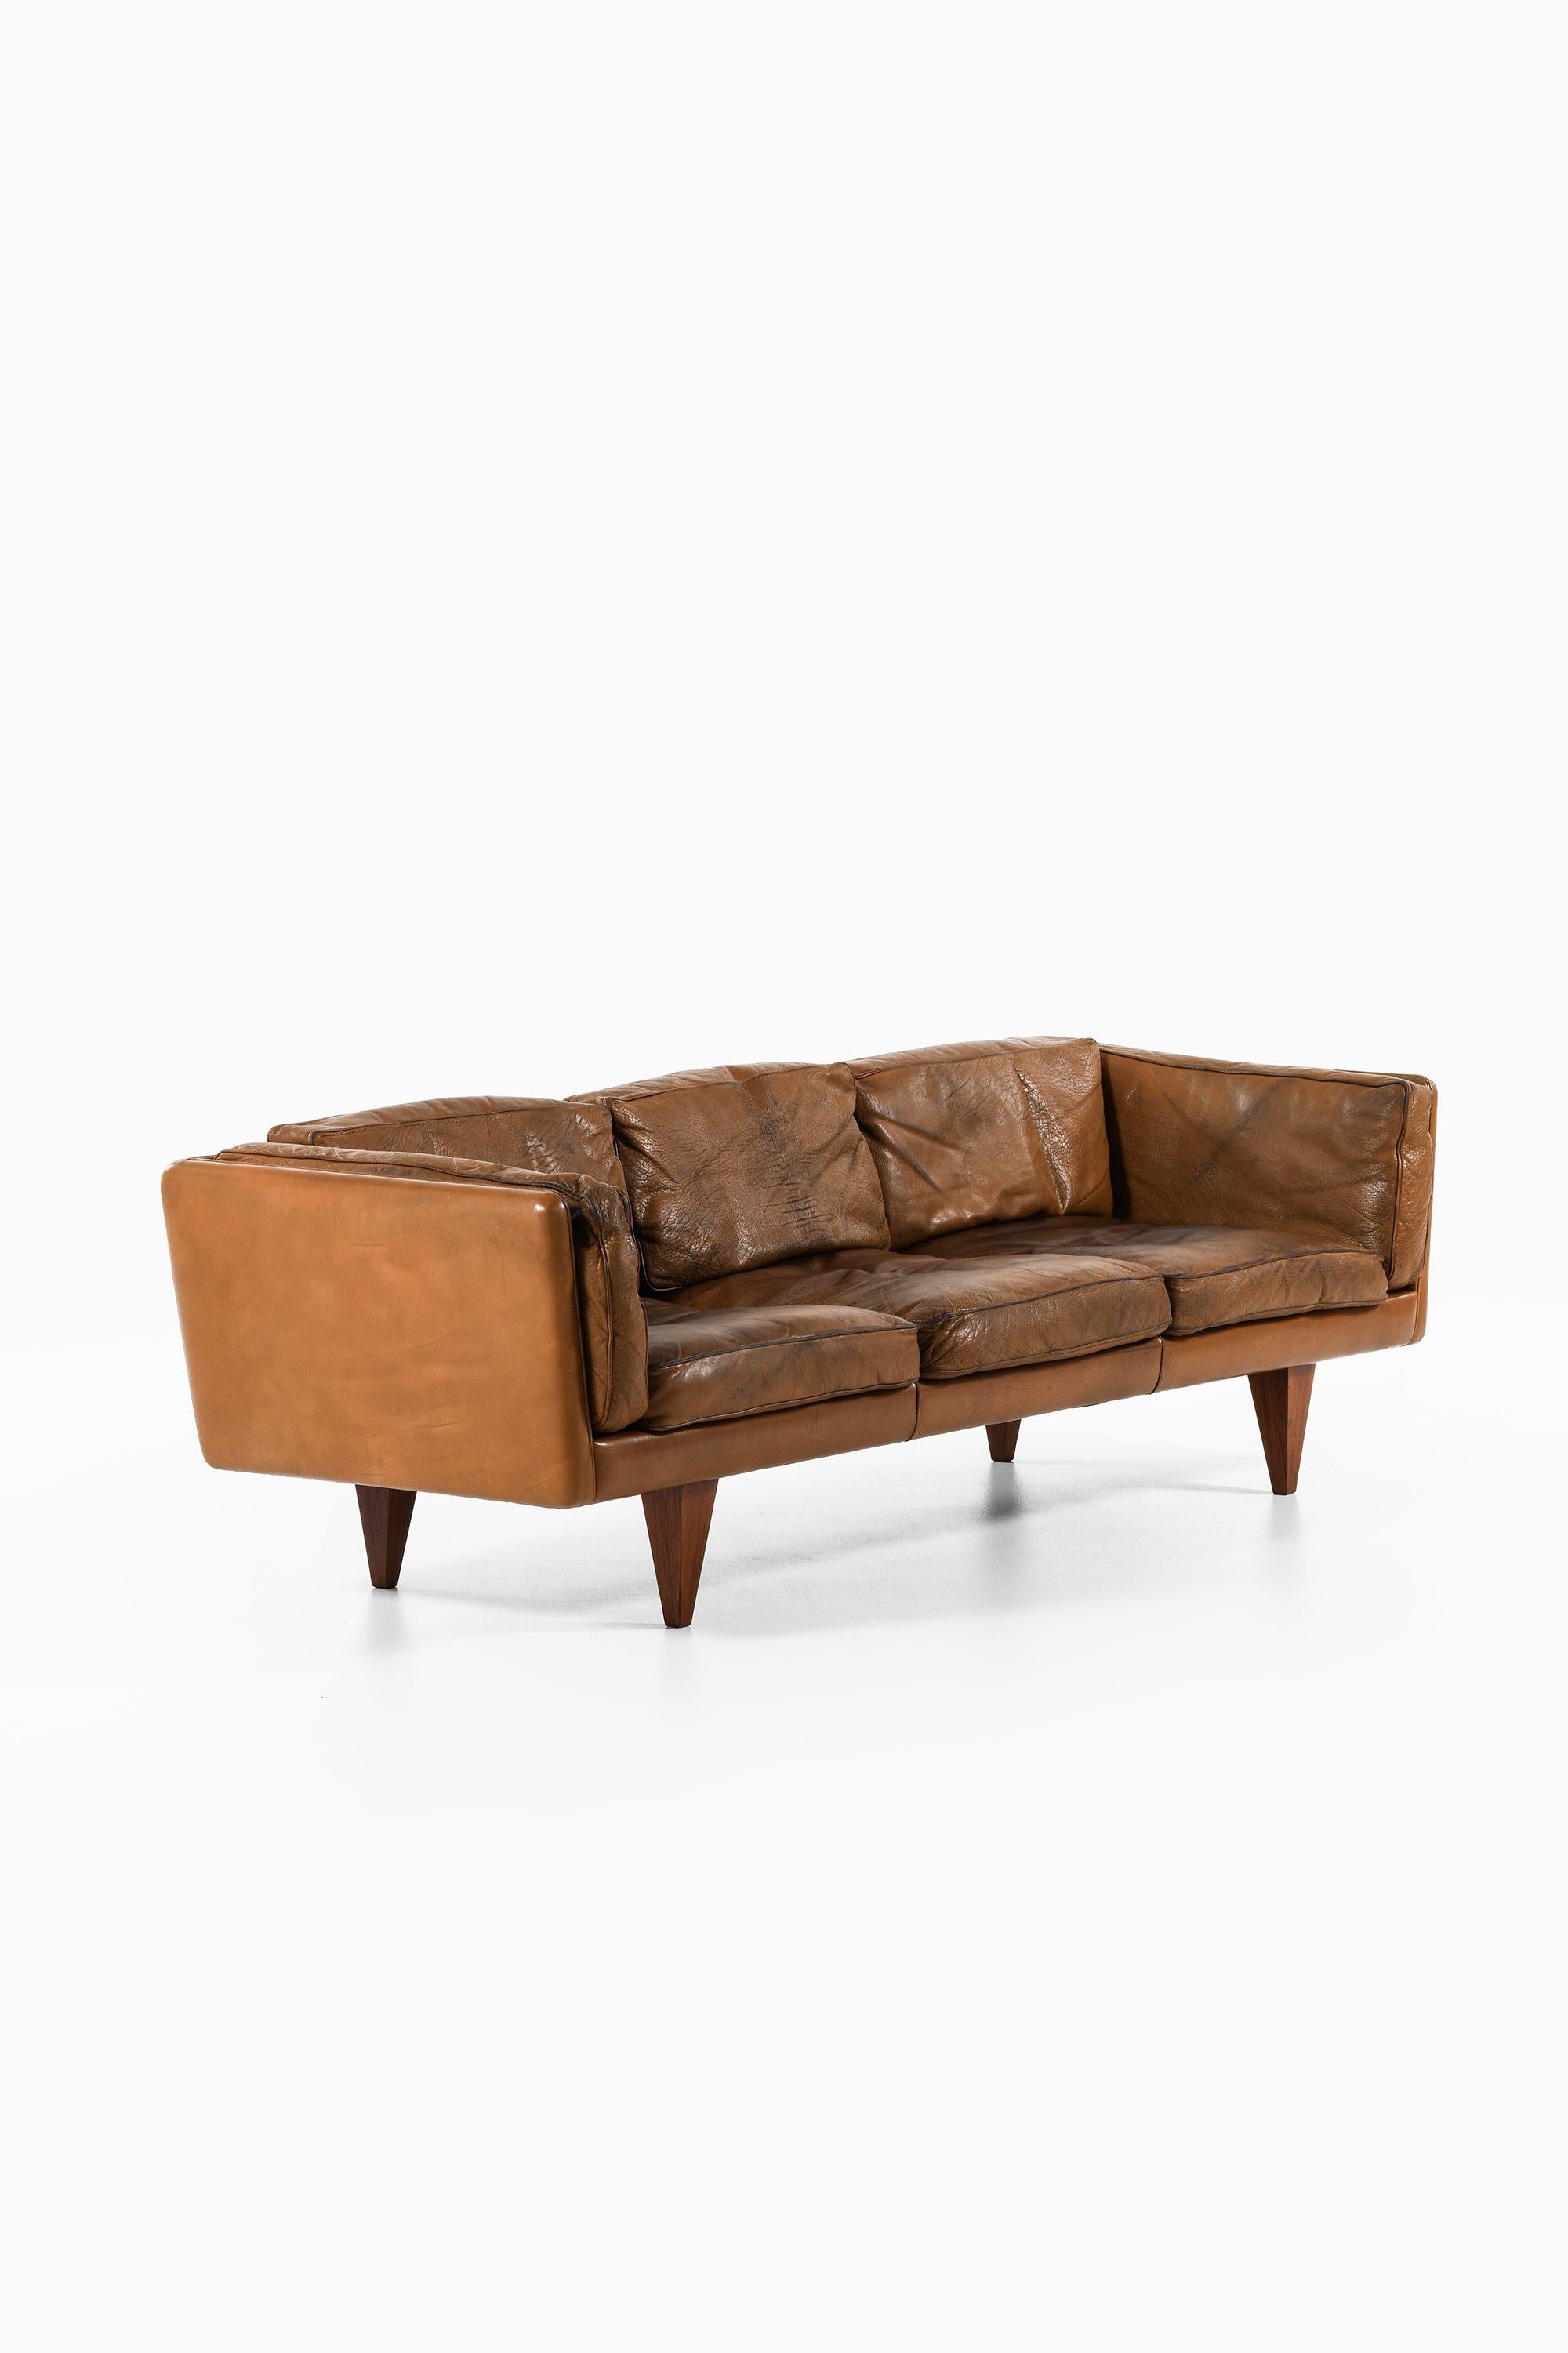 Sofa in Rosewood and Original Brown Leather by Illum Wikkelsø, 1960's

Additional Information:
Material: Rosewood and original brown leather
Style: Mid century, Scandinavian
Very rare sofa model V11
Produced by Holger Christiansen in